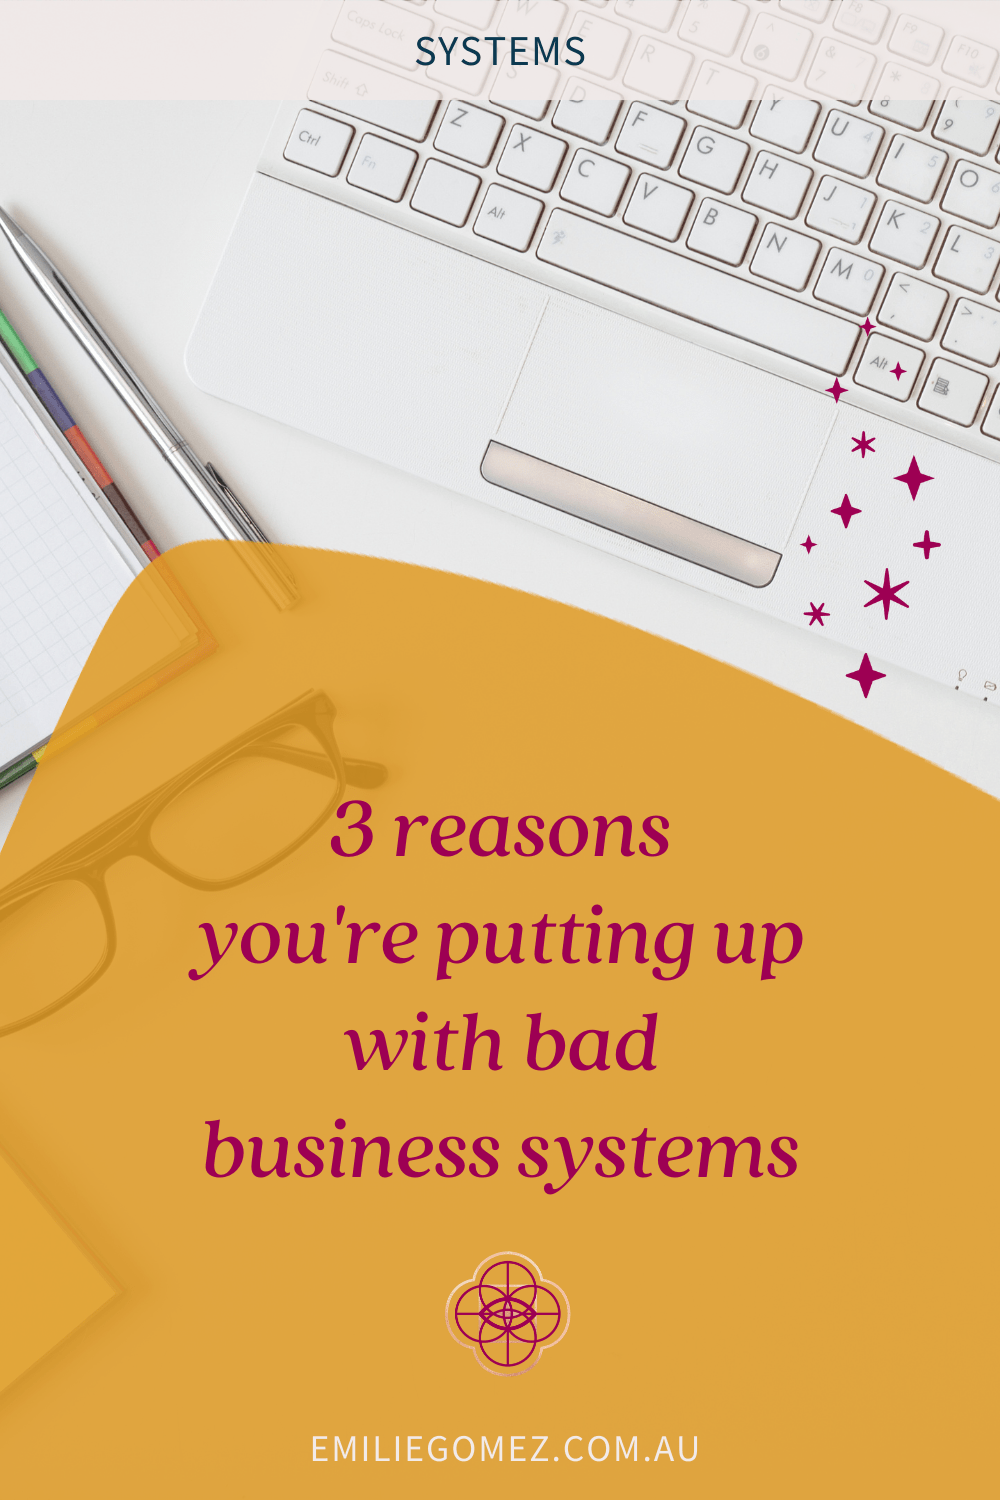 Do you live by the quote "If it ain't broke, don't fix it" when managing your business systems? As a systems strategist, I see so many solopreneurs putting up with bad business systems. But there are huge risks if you’re doing this - burnout, lack of efficiency & effectiveness - you might even be stopping your business from growing & flourishing. So, why do entrepreneurs avoid setting up better systems & processes in their business? Click through to find out the top 3 reasons why…